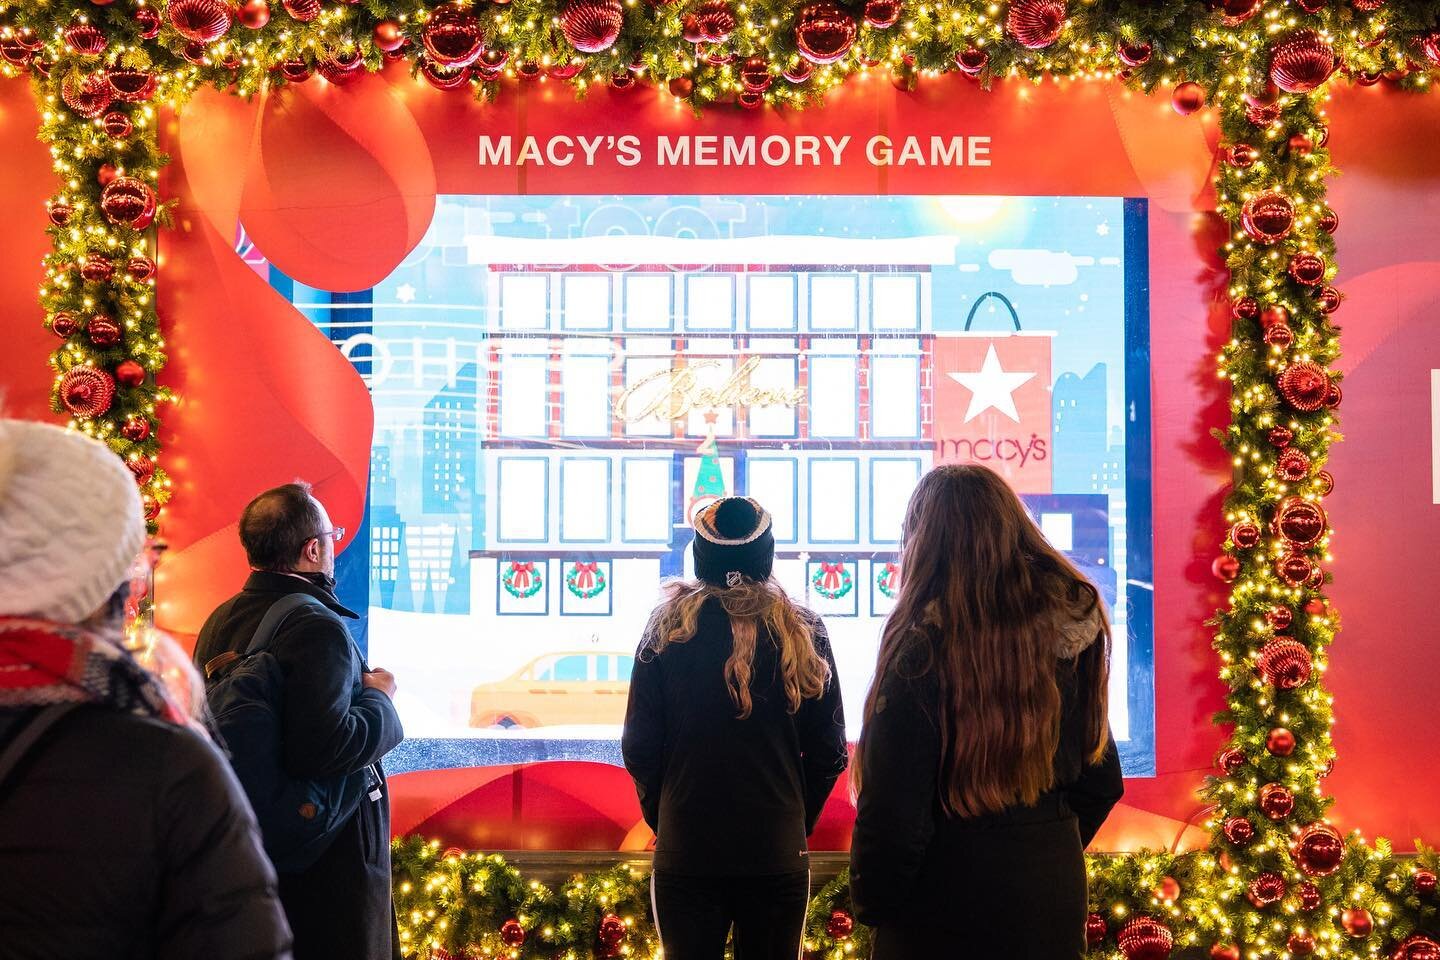 Another holiday throwback from this past season and bringing cheer to passersby at Macy's Herald Square! We developed three interactive holiday games in the windows along 34th Street where visitors could play the arcade-style games safely with our fo